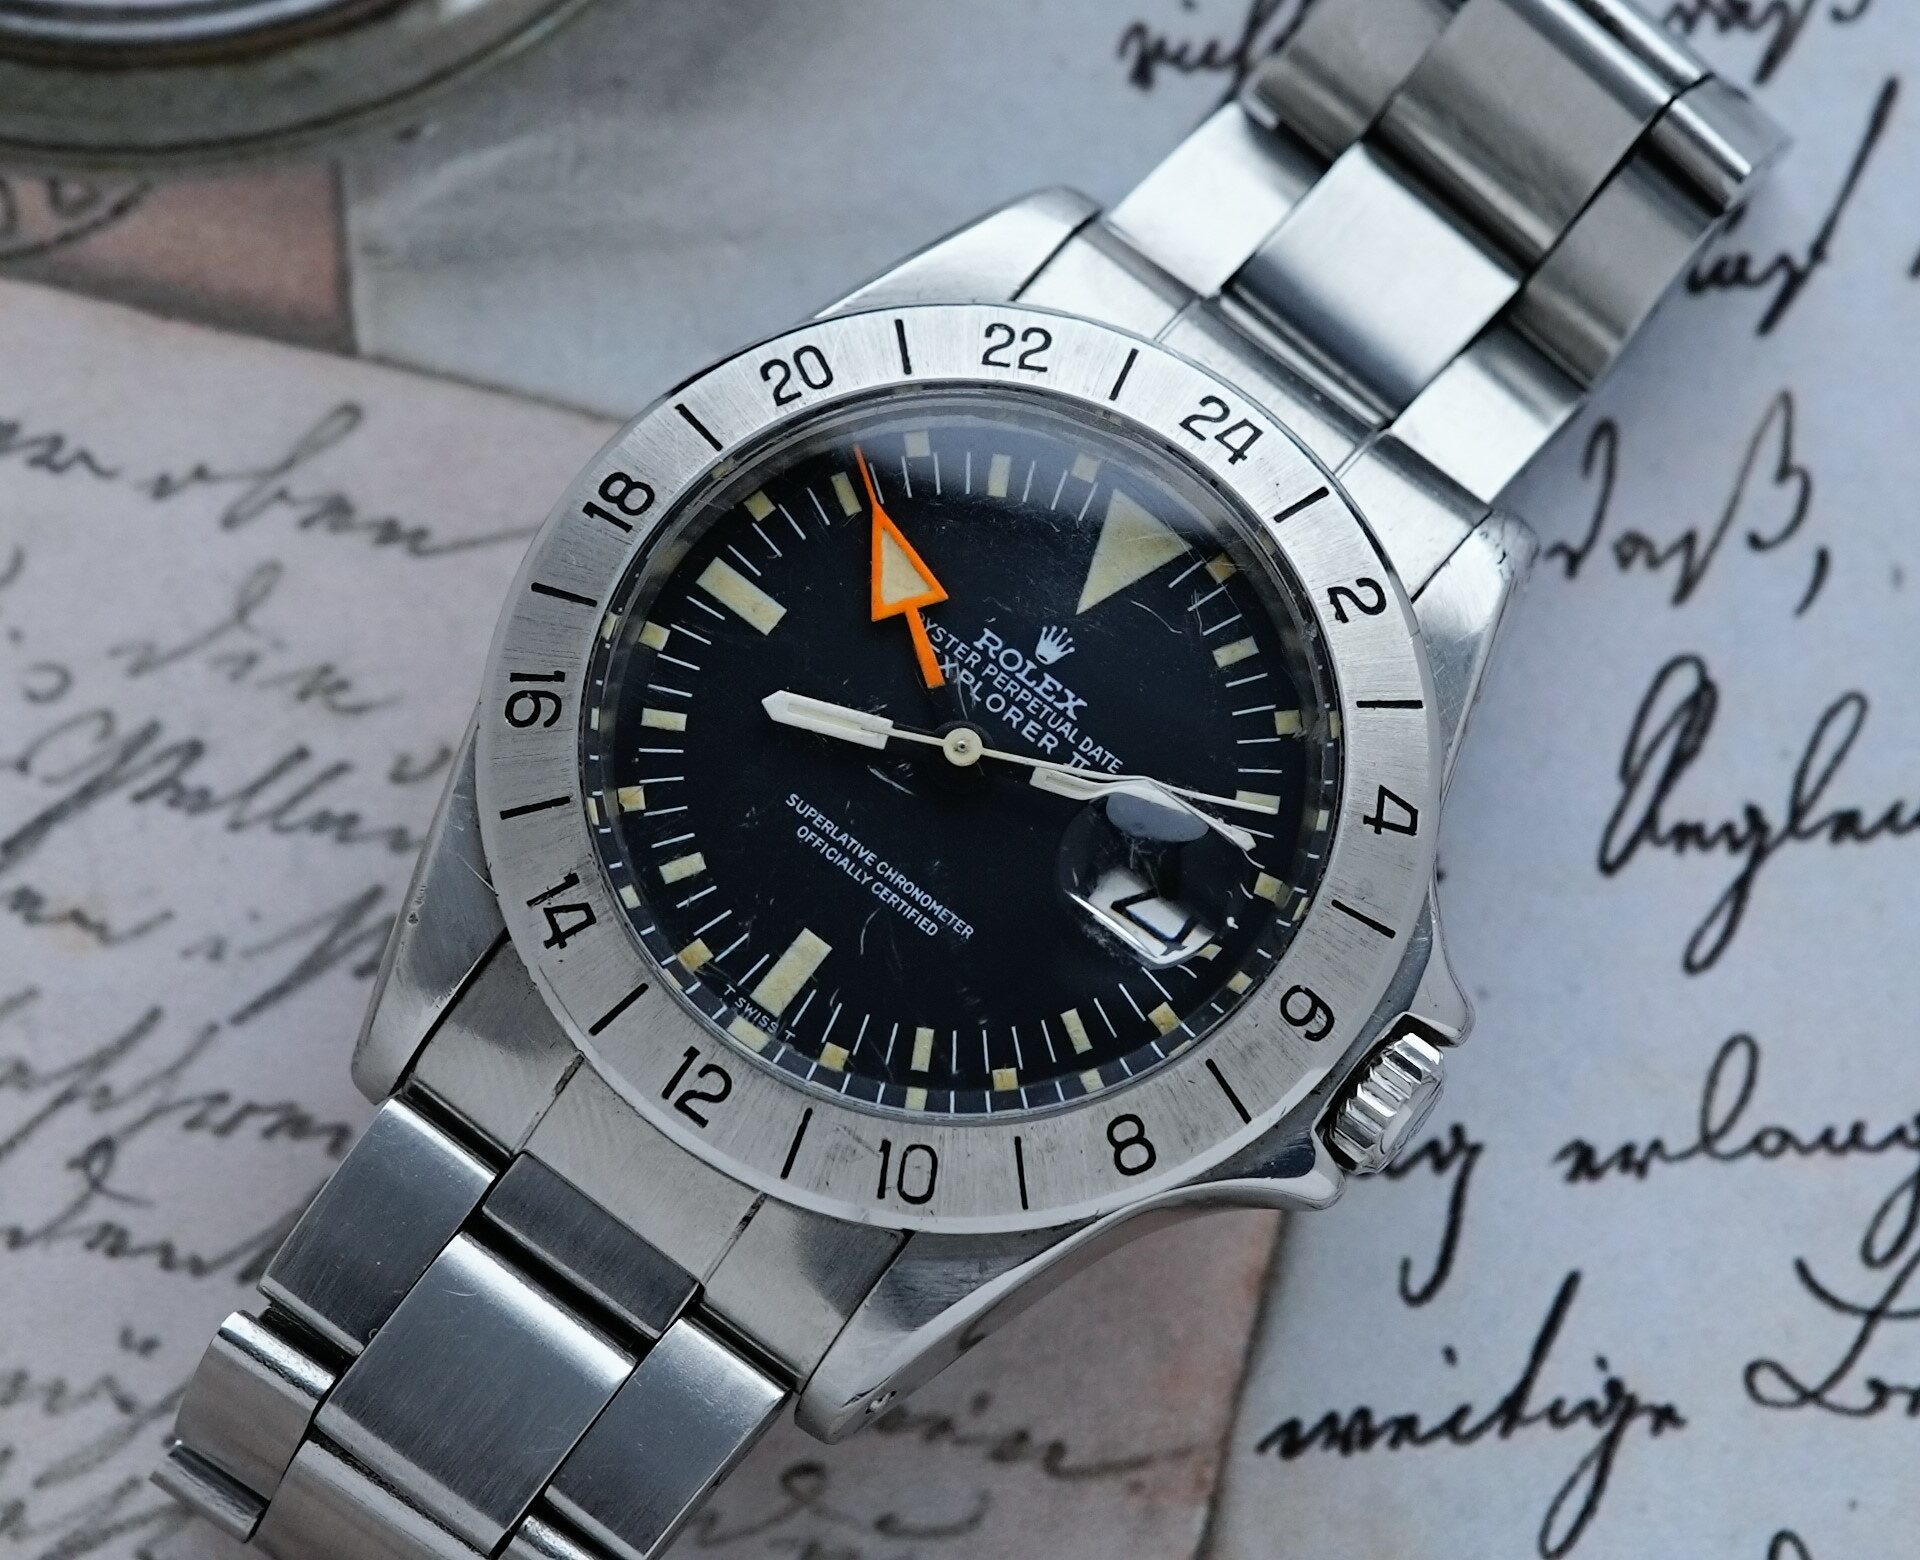 Rolex Explorer II 1655 Steve McQueen 1971 Freccione watch featured on an angle.